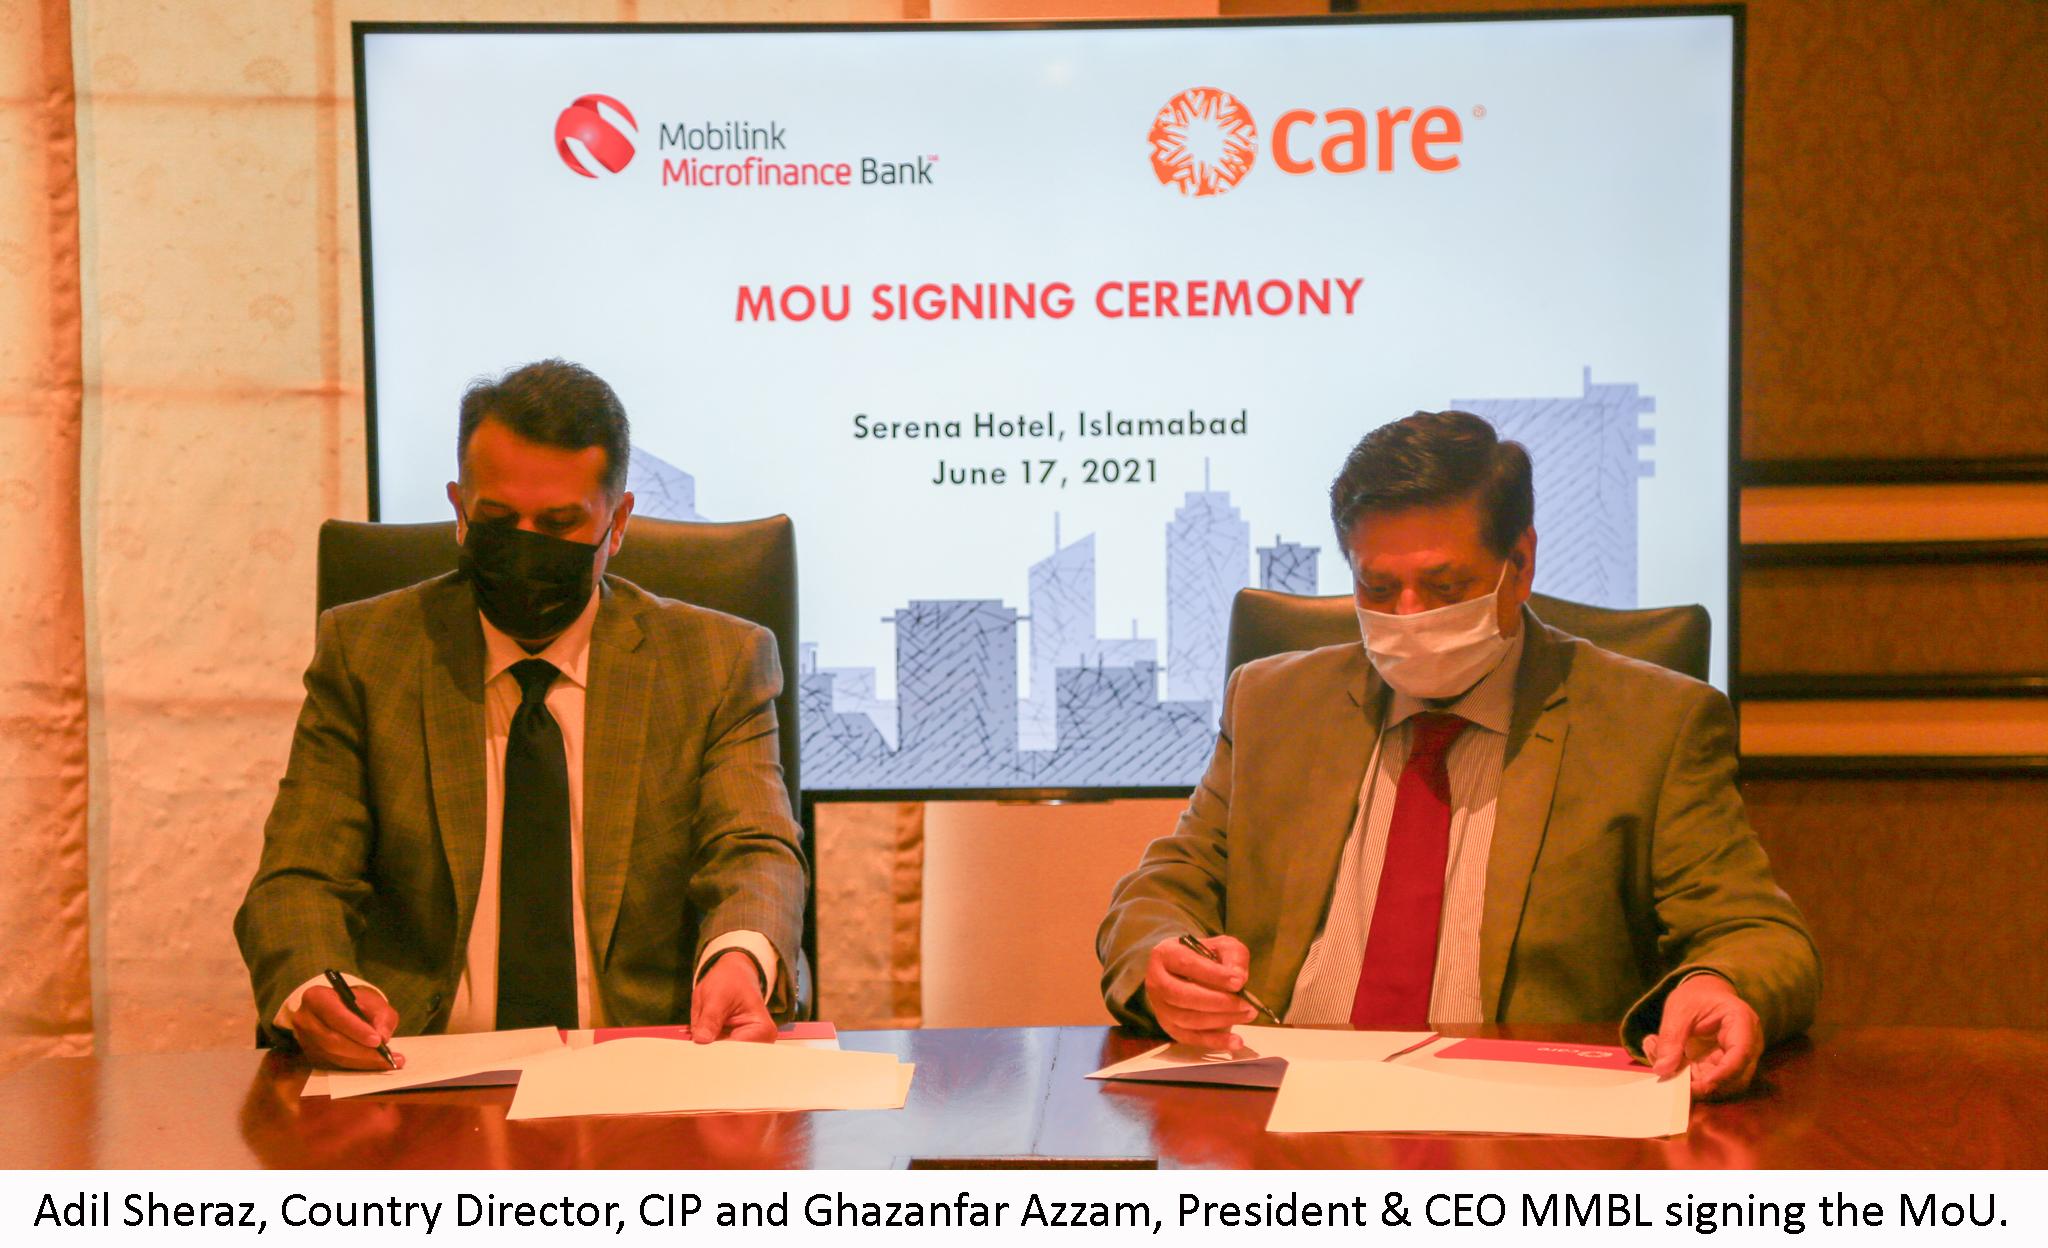 Mobilink Microfinance Bank, CARE International in Pakistan sign MoU to Strengthen Entrepreneurial and Financial Ecosystem